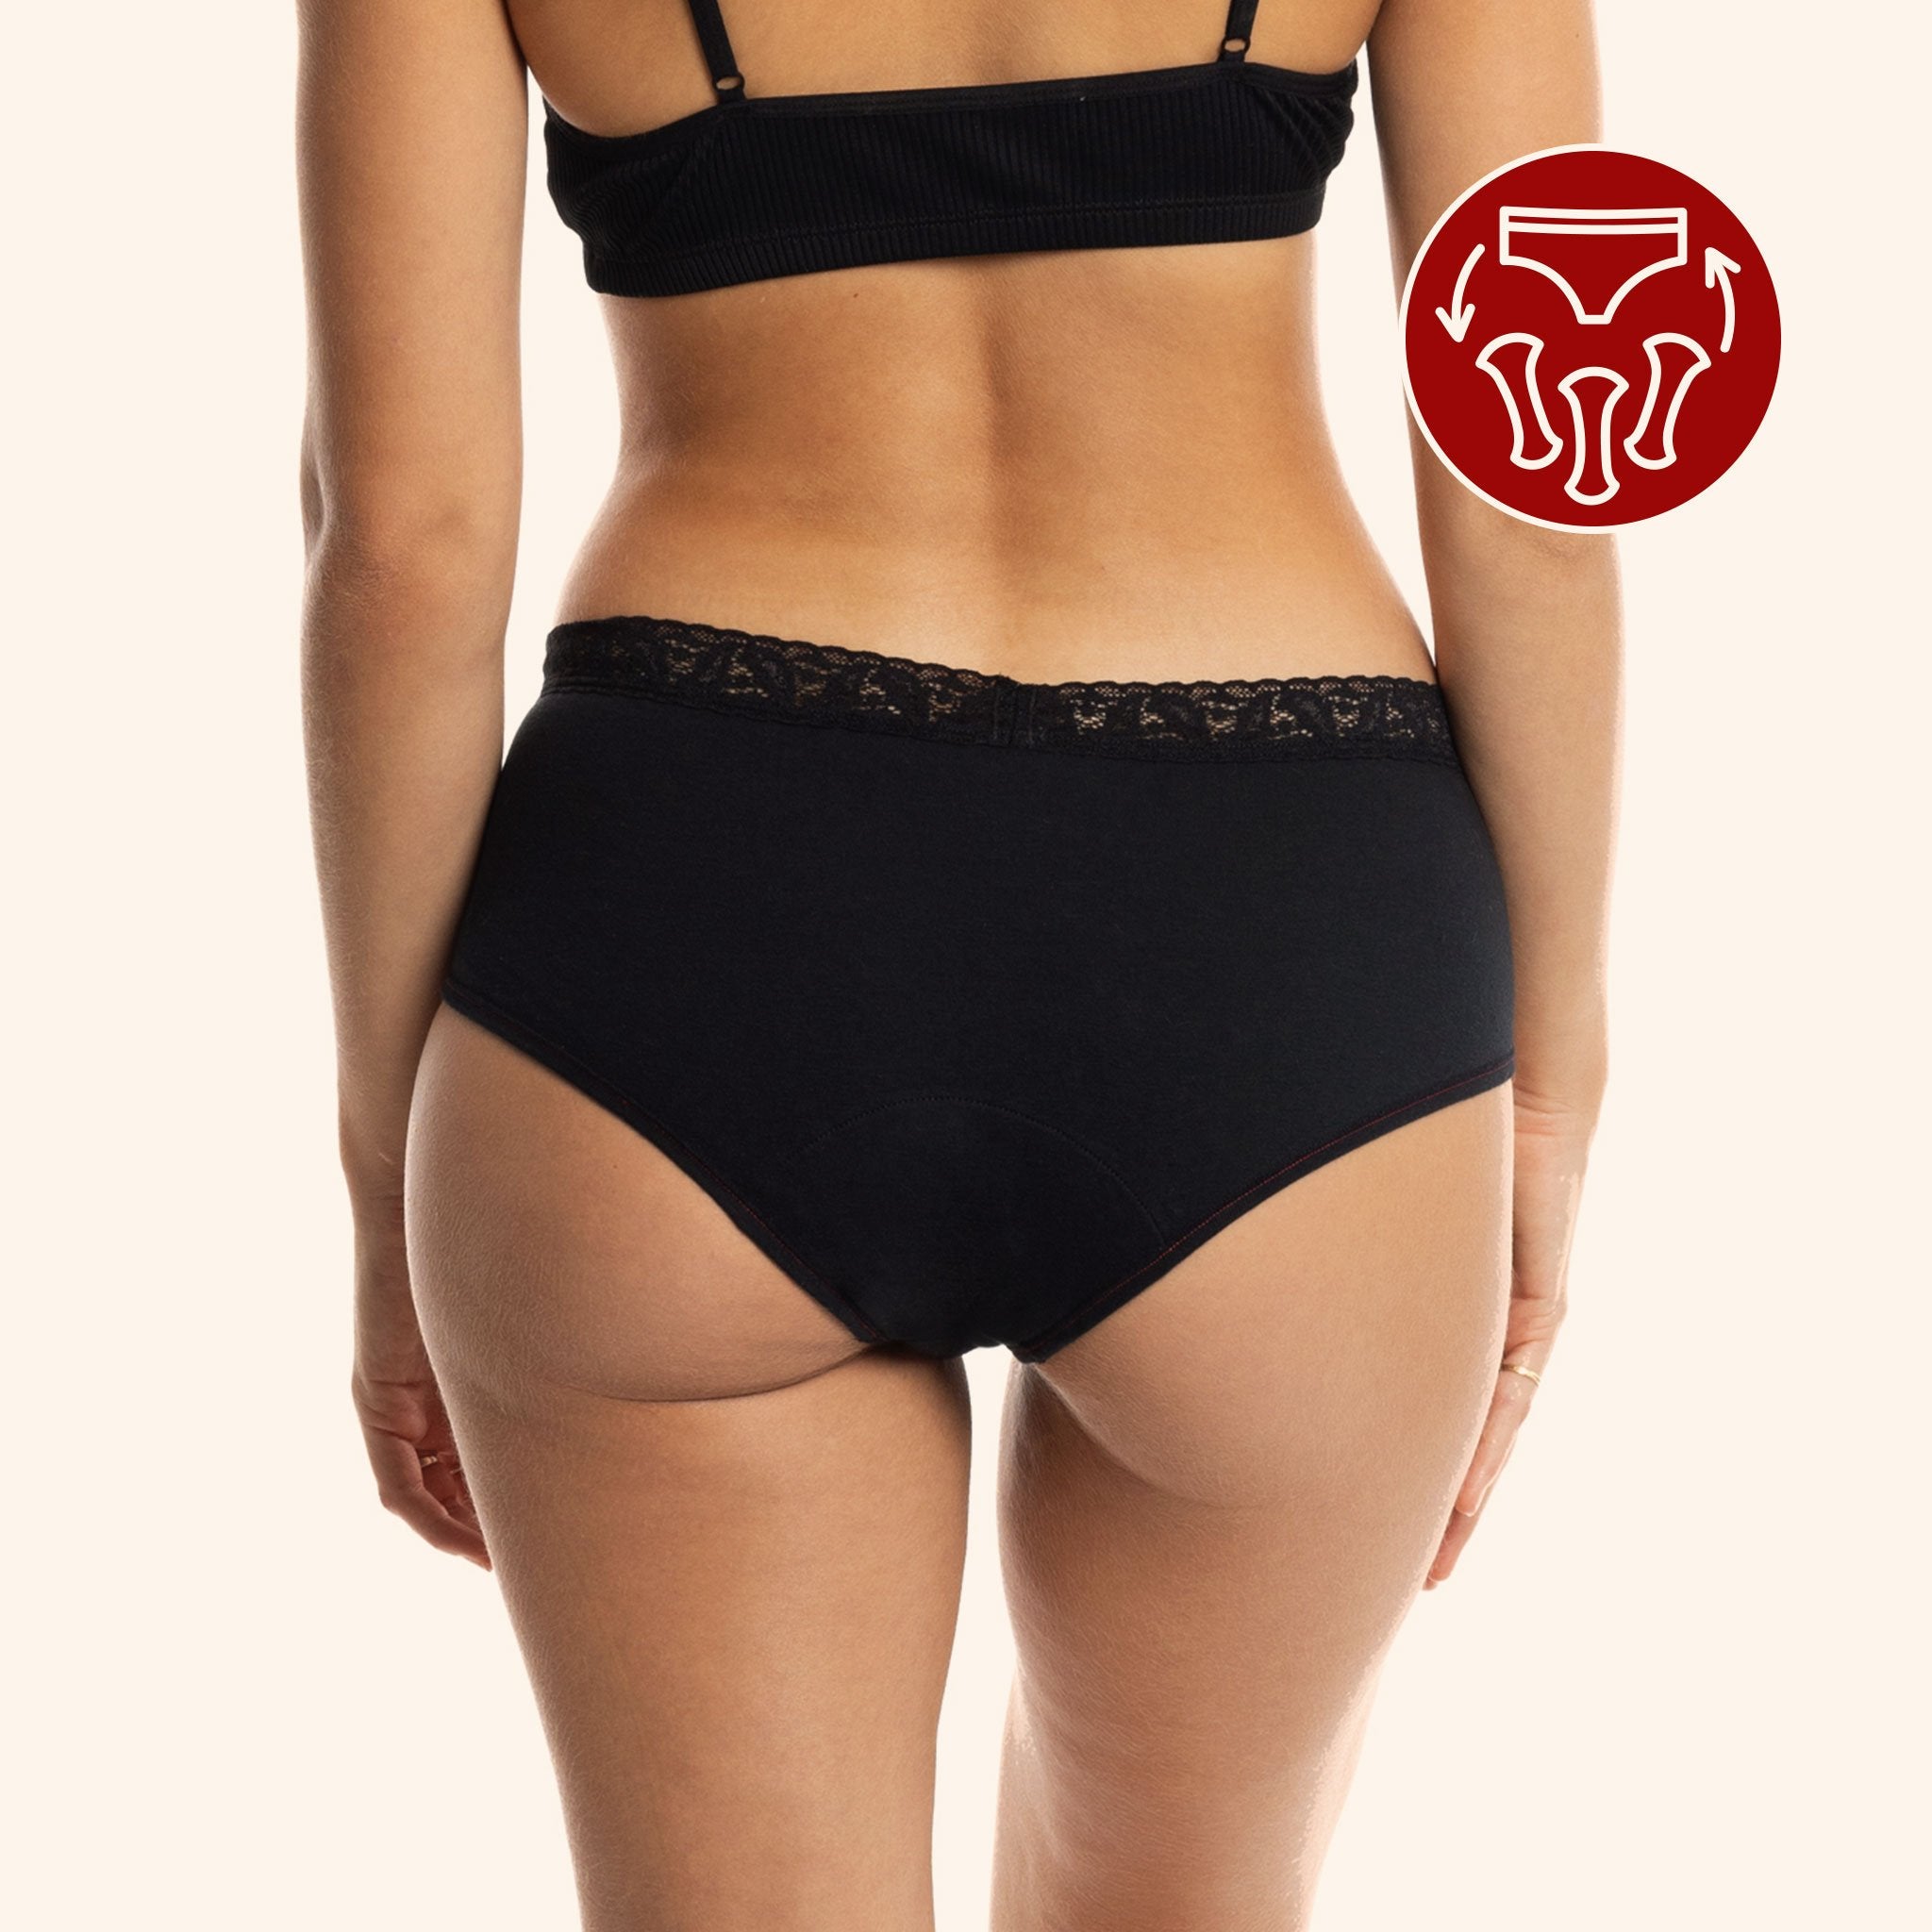 The Shorty Lace Panty : Period underwear with 3 pads